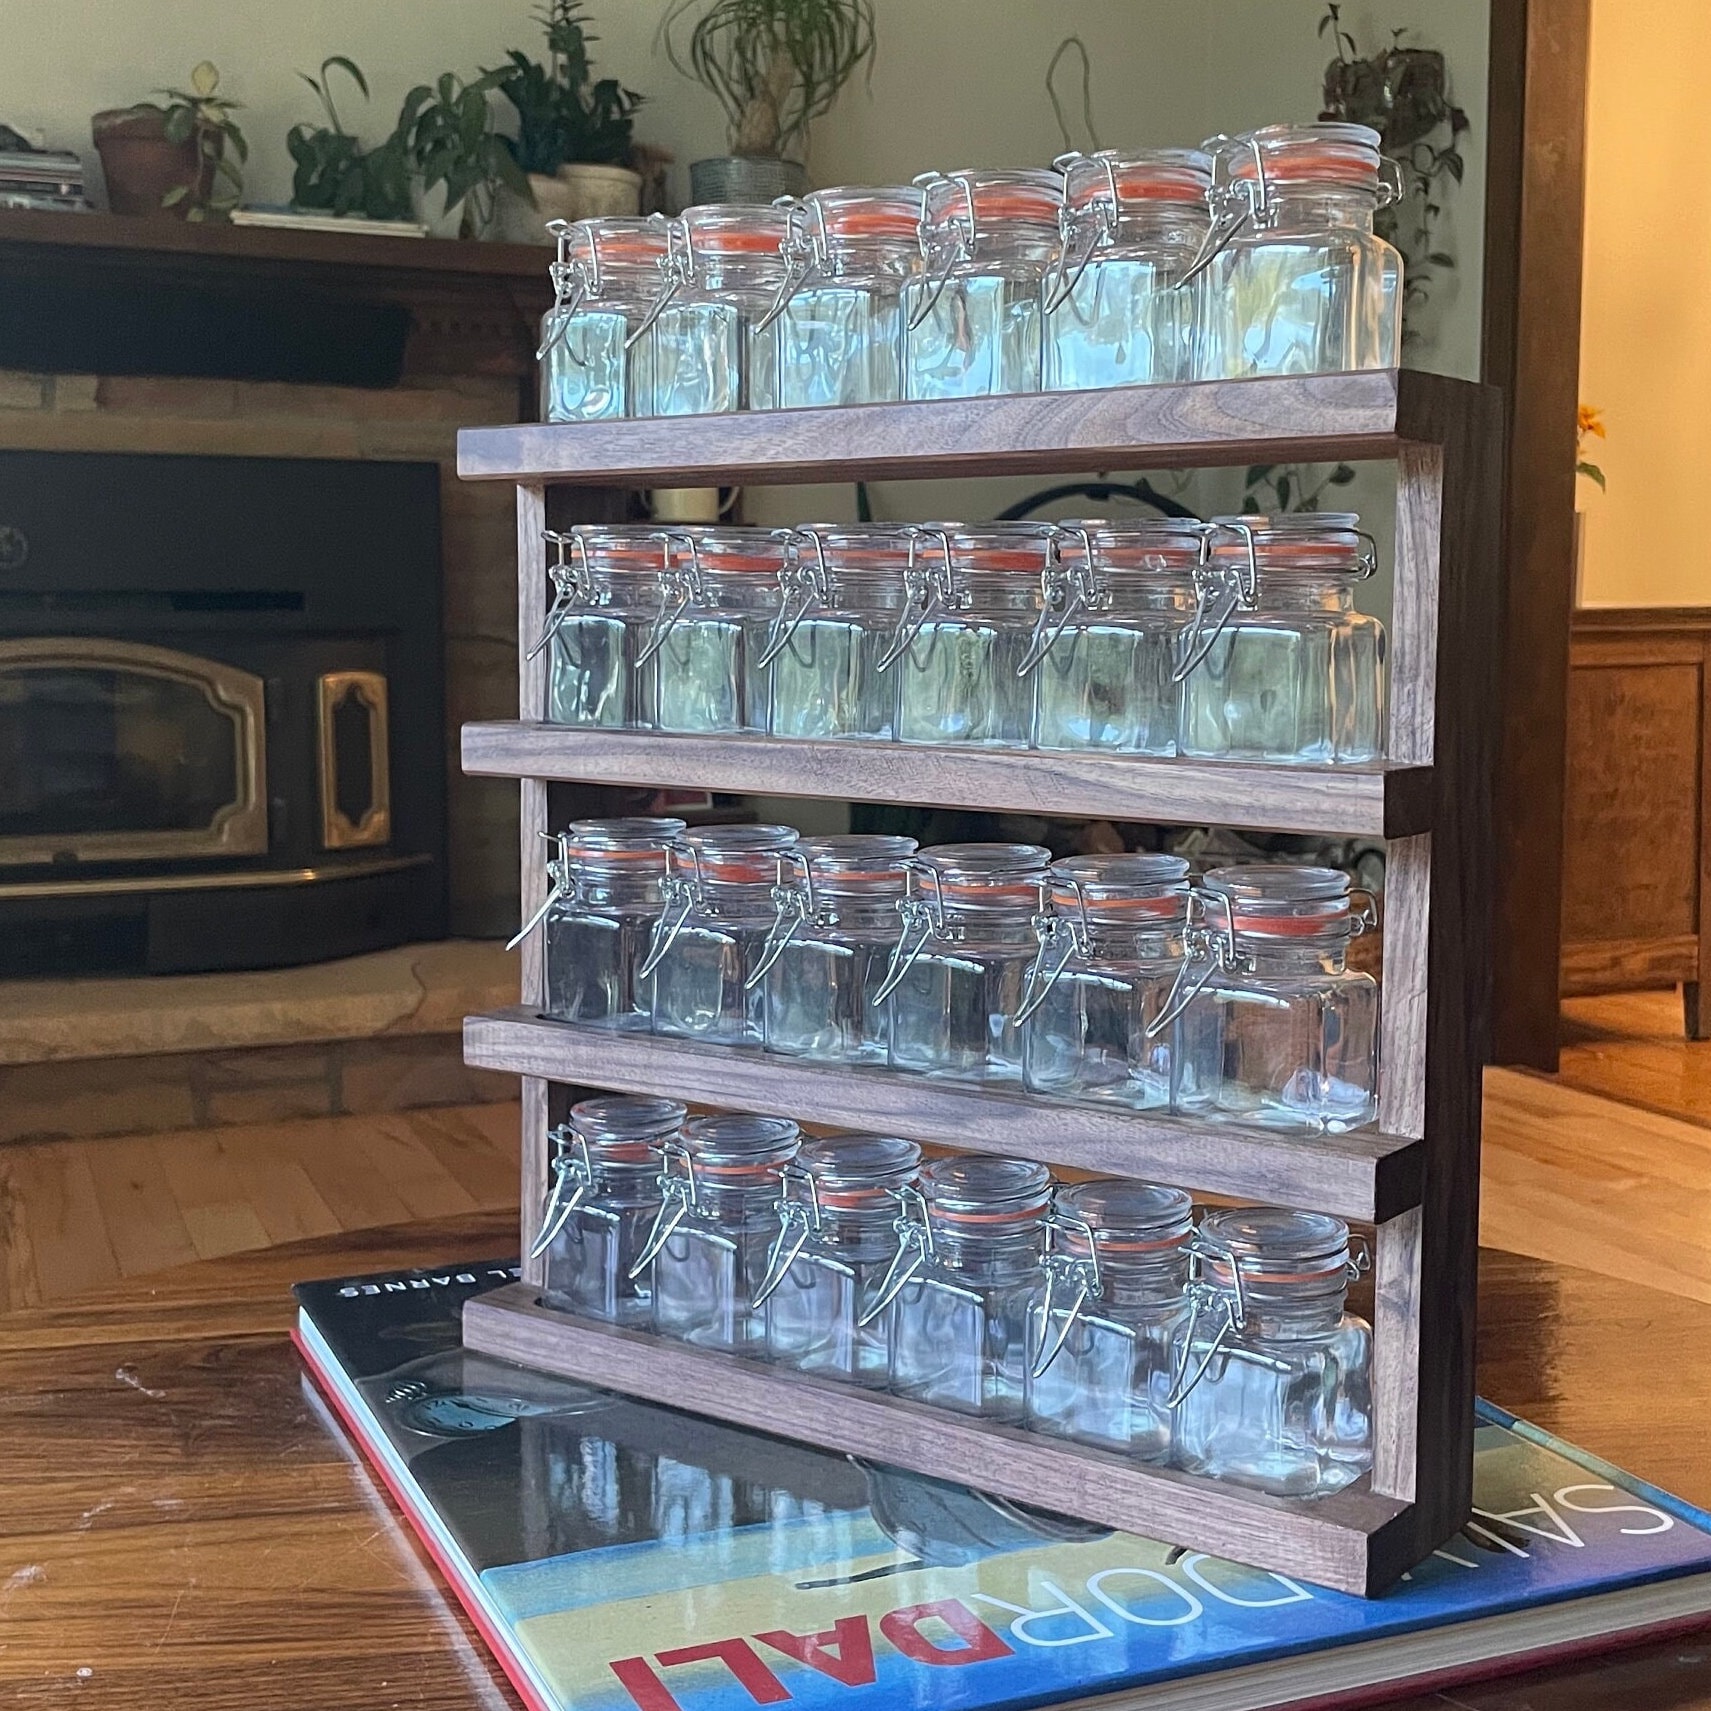 Spice Racks with 24 Glass Spice Jars & 2 Types of Printed Spice Labels by Talented Kitchen. Complete Set: 2 Shelf Stainless Steel 3-Tier Racks, 24